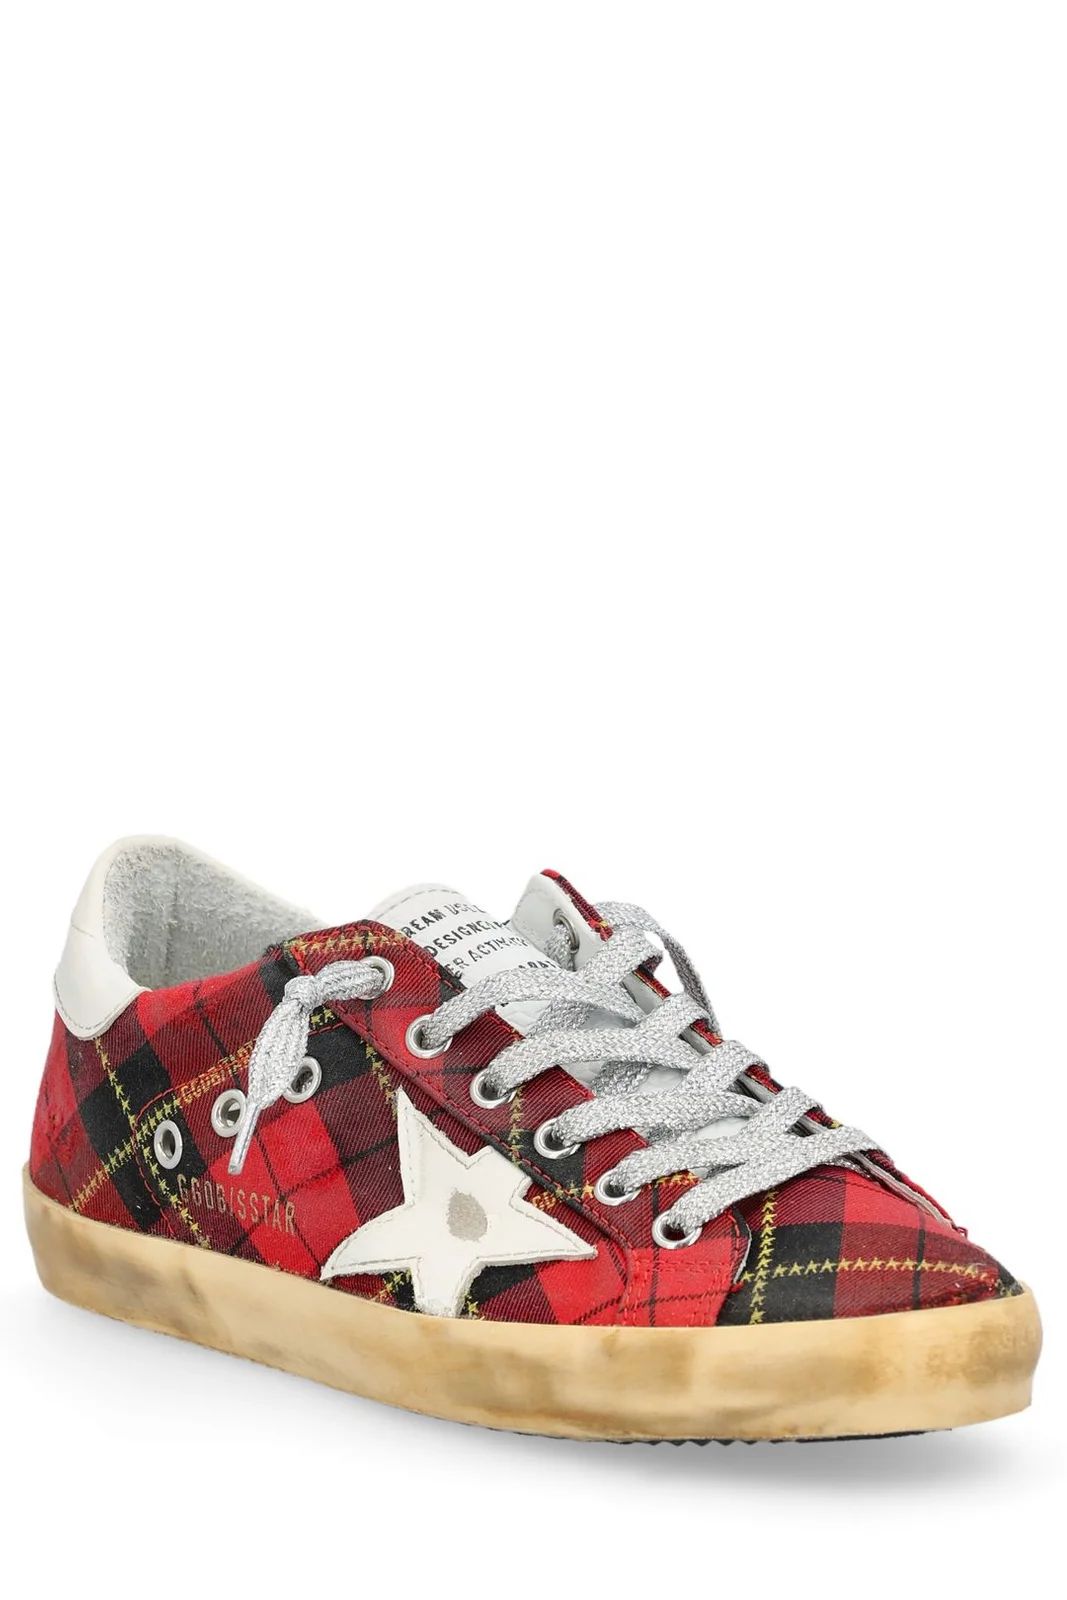 Golden Goose Deluxe Brand Checked Lace-Up Sneakers | Cettire Global